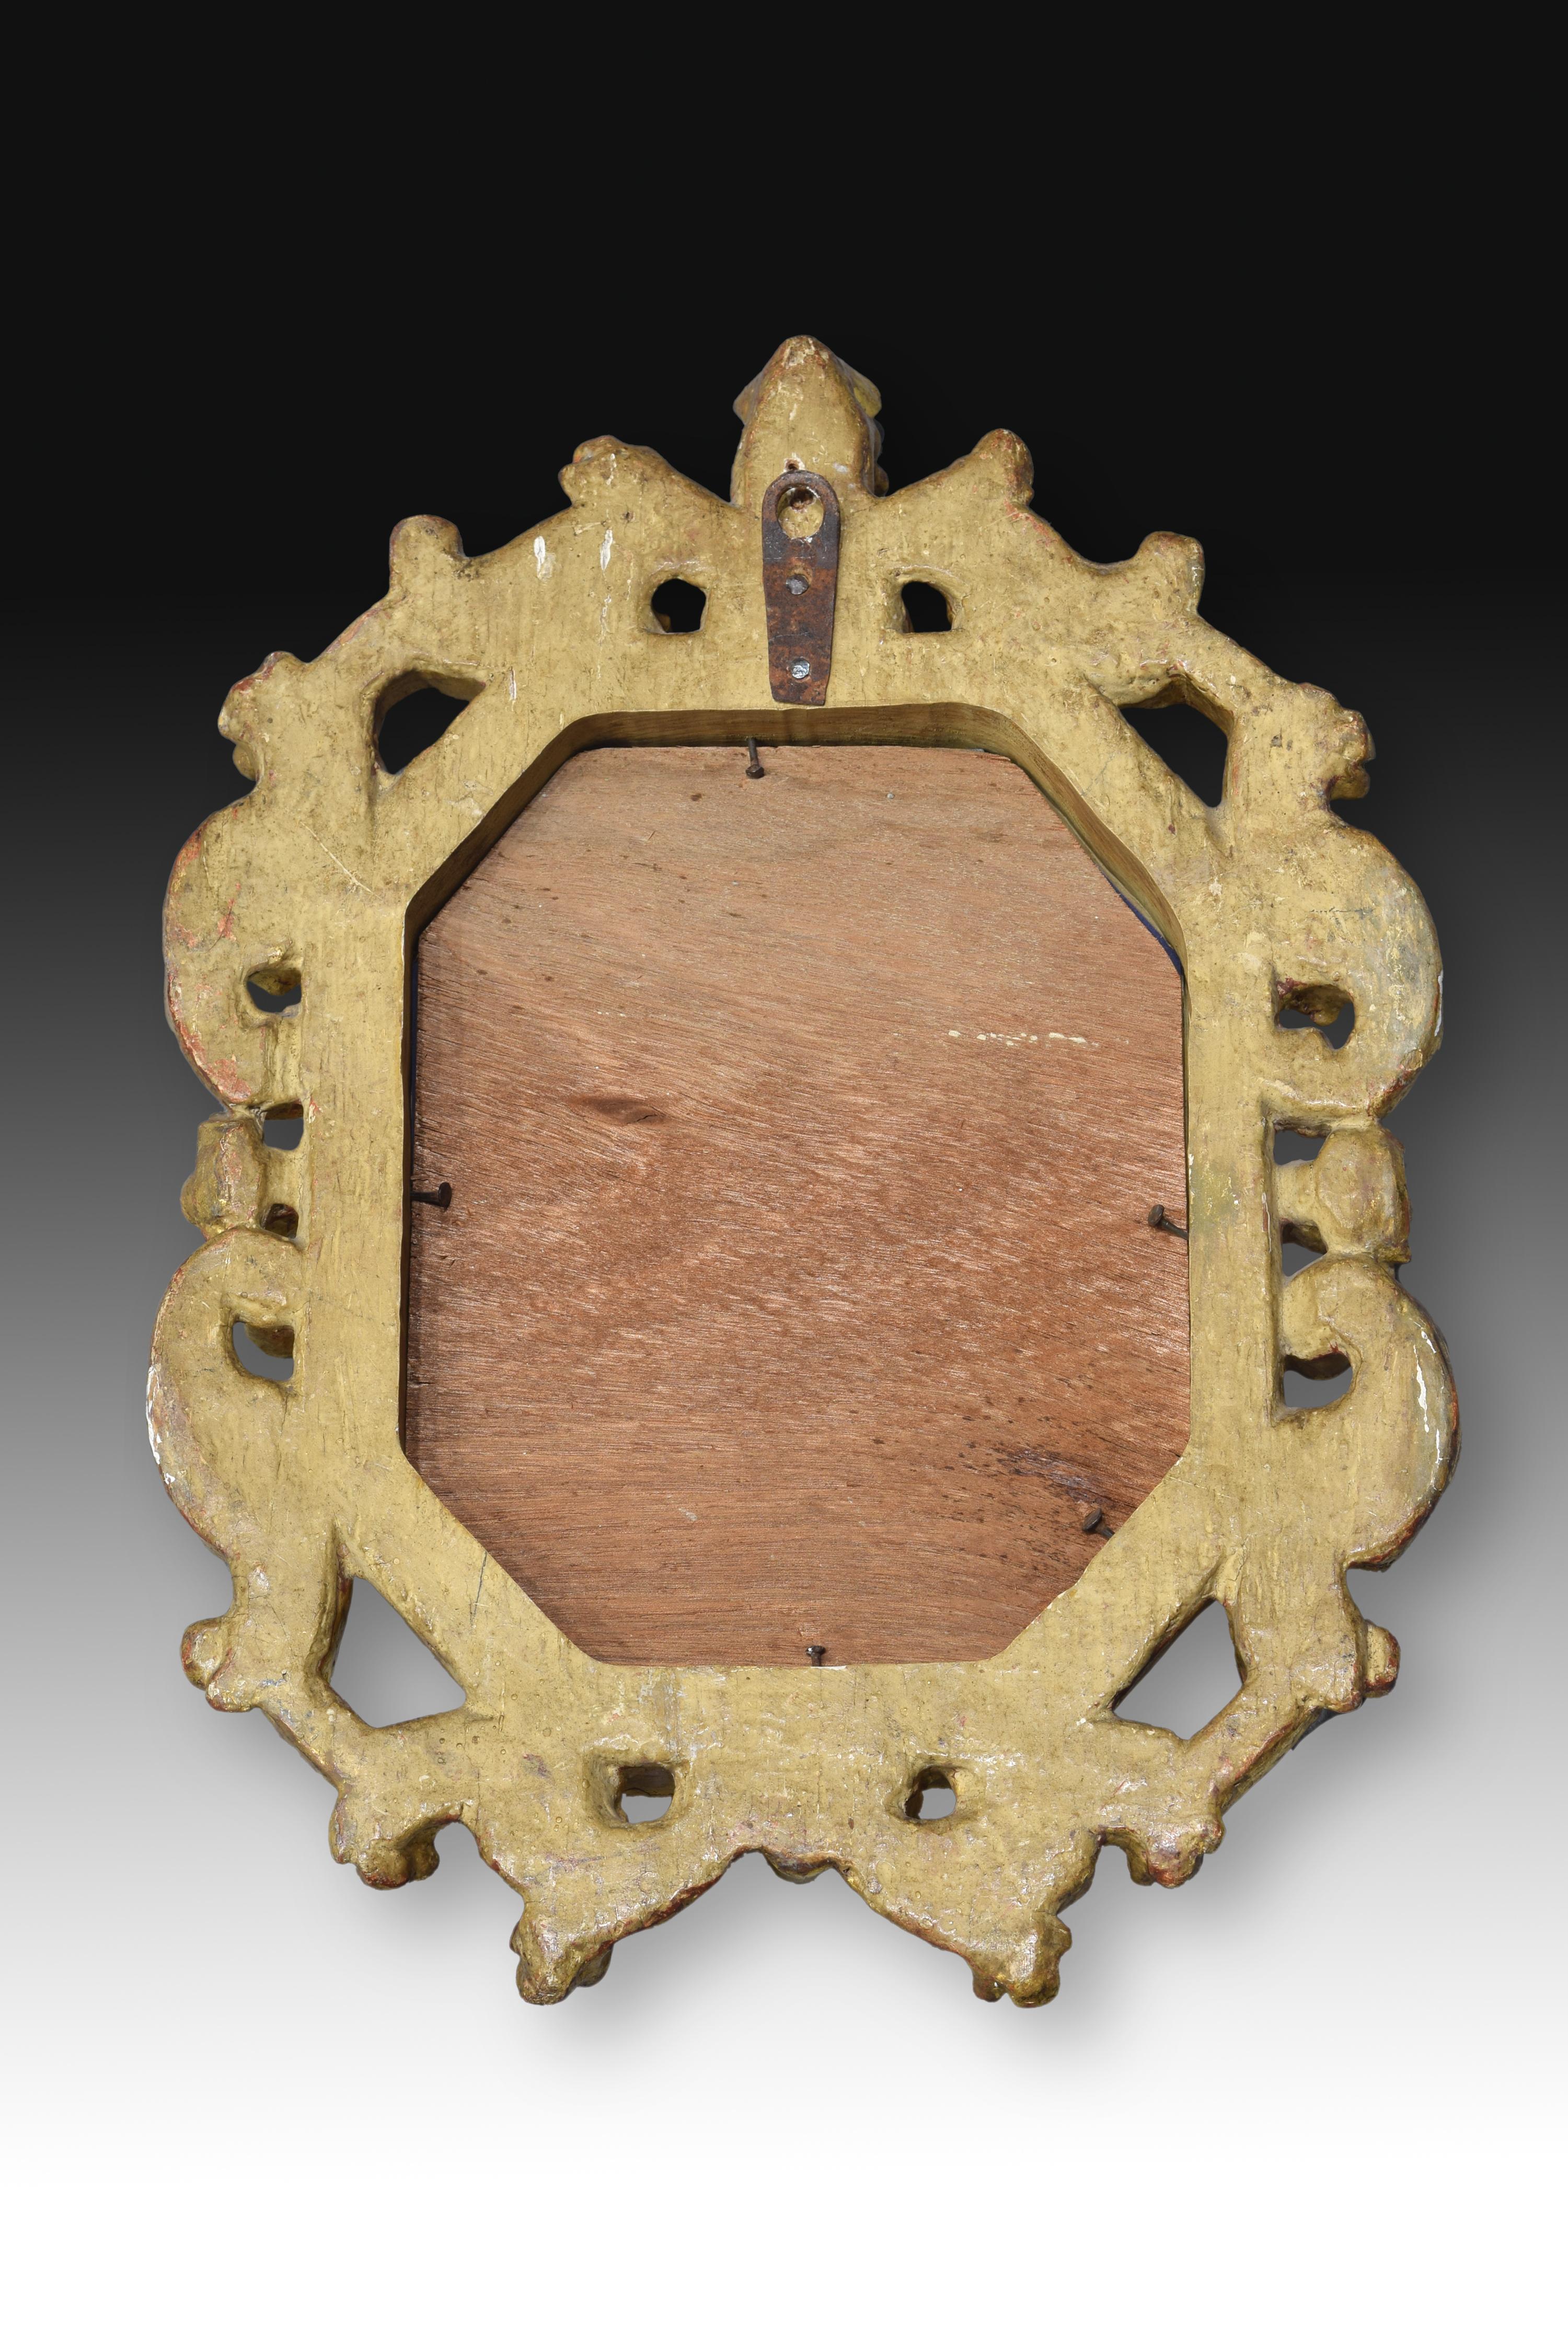 Framework. Golden wood, 18th century.
 Frame made of carved and gilded wood that has a series of moldings inside forming an octagon and a composition openwork towards the outside with plant elements, scrolls and simple architectural moldings. It is